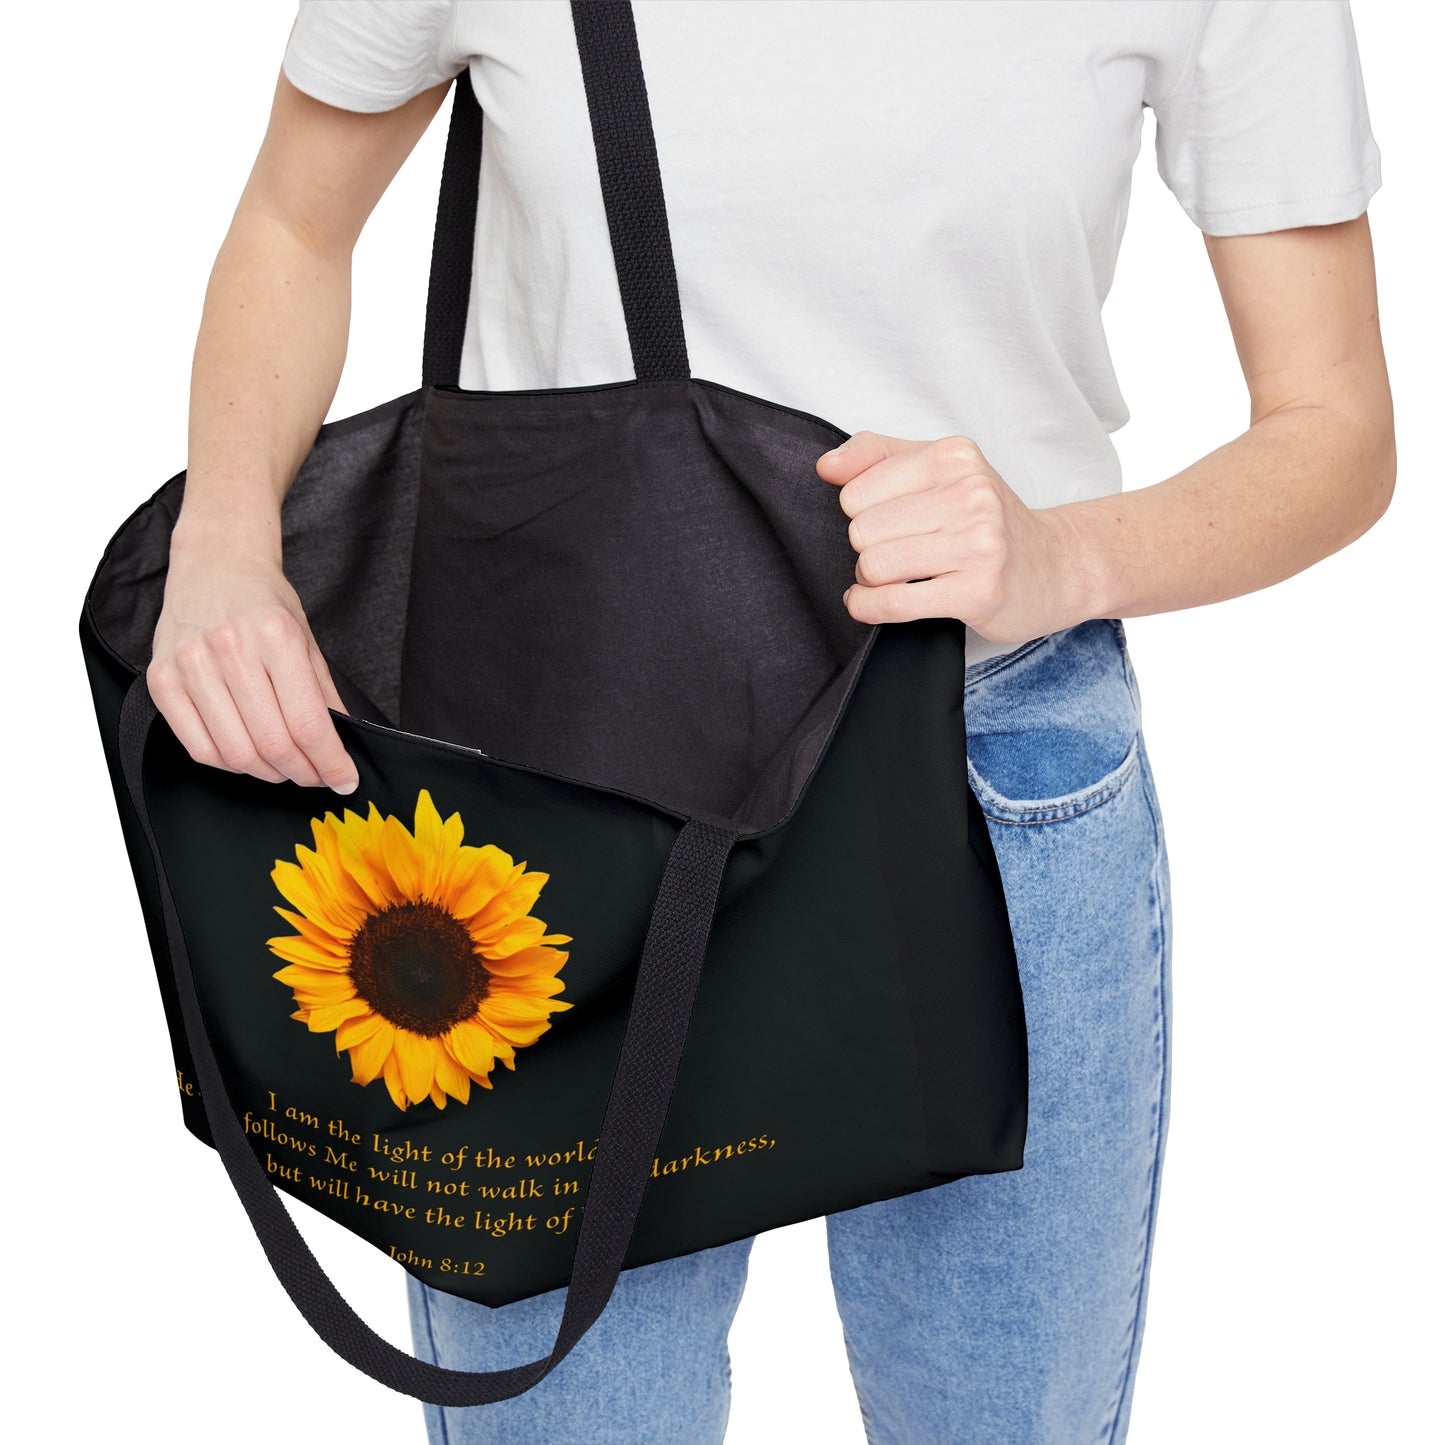 Weekender Tote Bag - The Light of the World